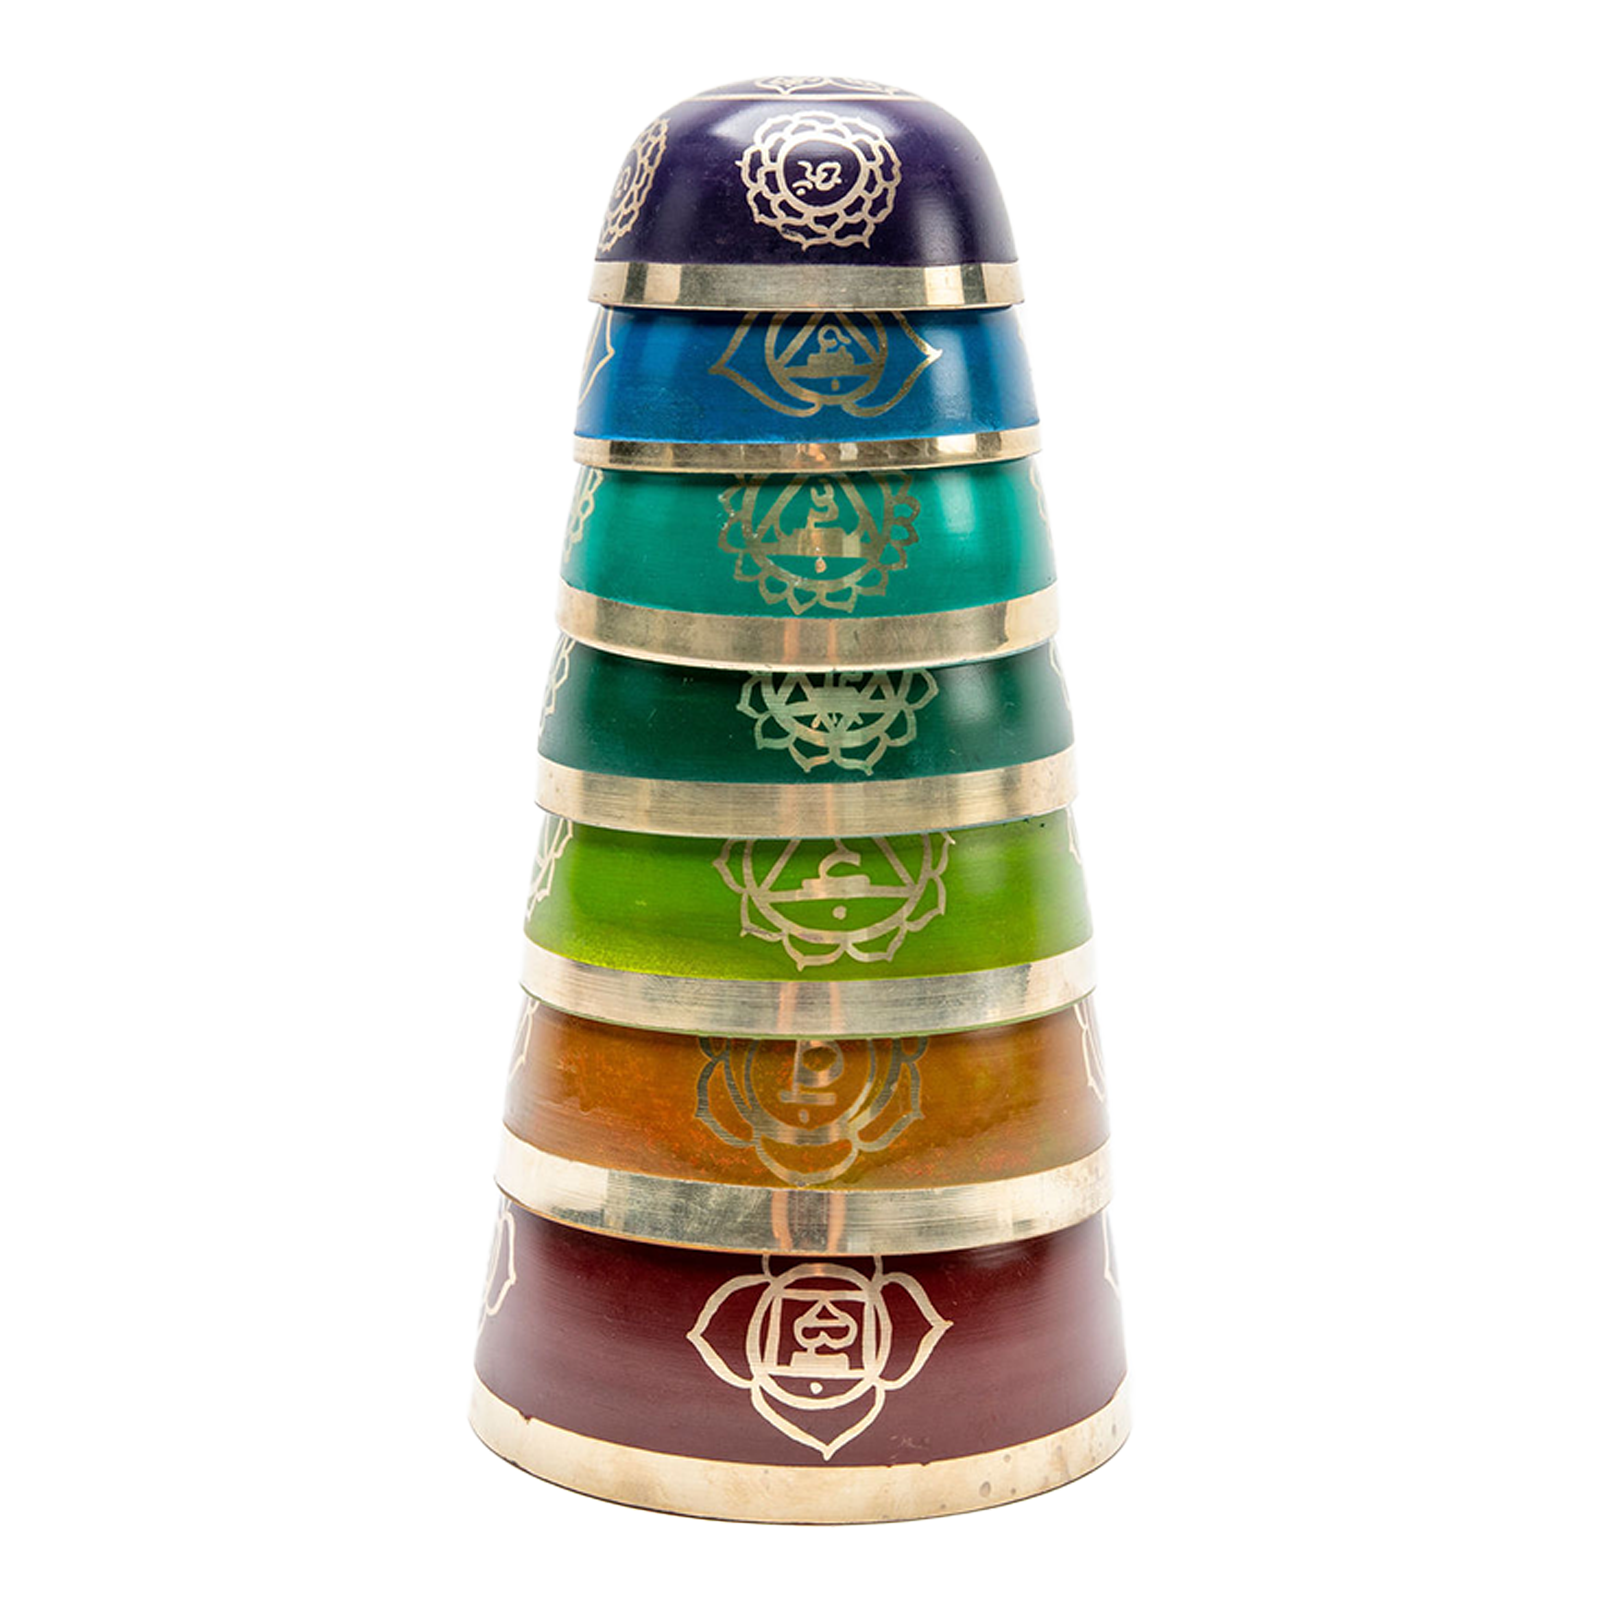 Each bowl of the Chakra 7 Bowl Set is stacked vertically upside down so that the largest bowl is at the bottom against a solid white backdrop.